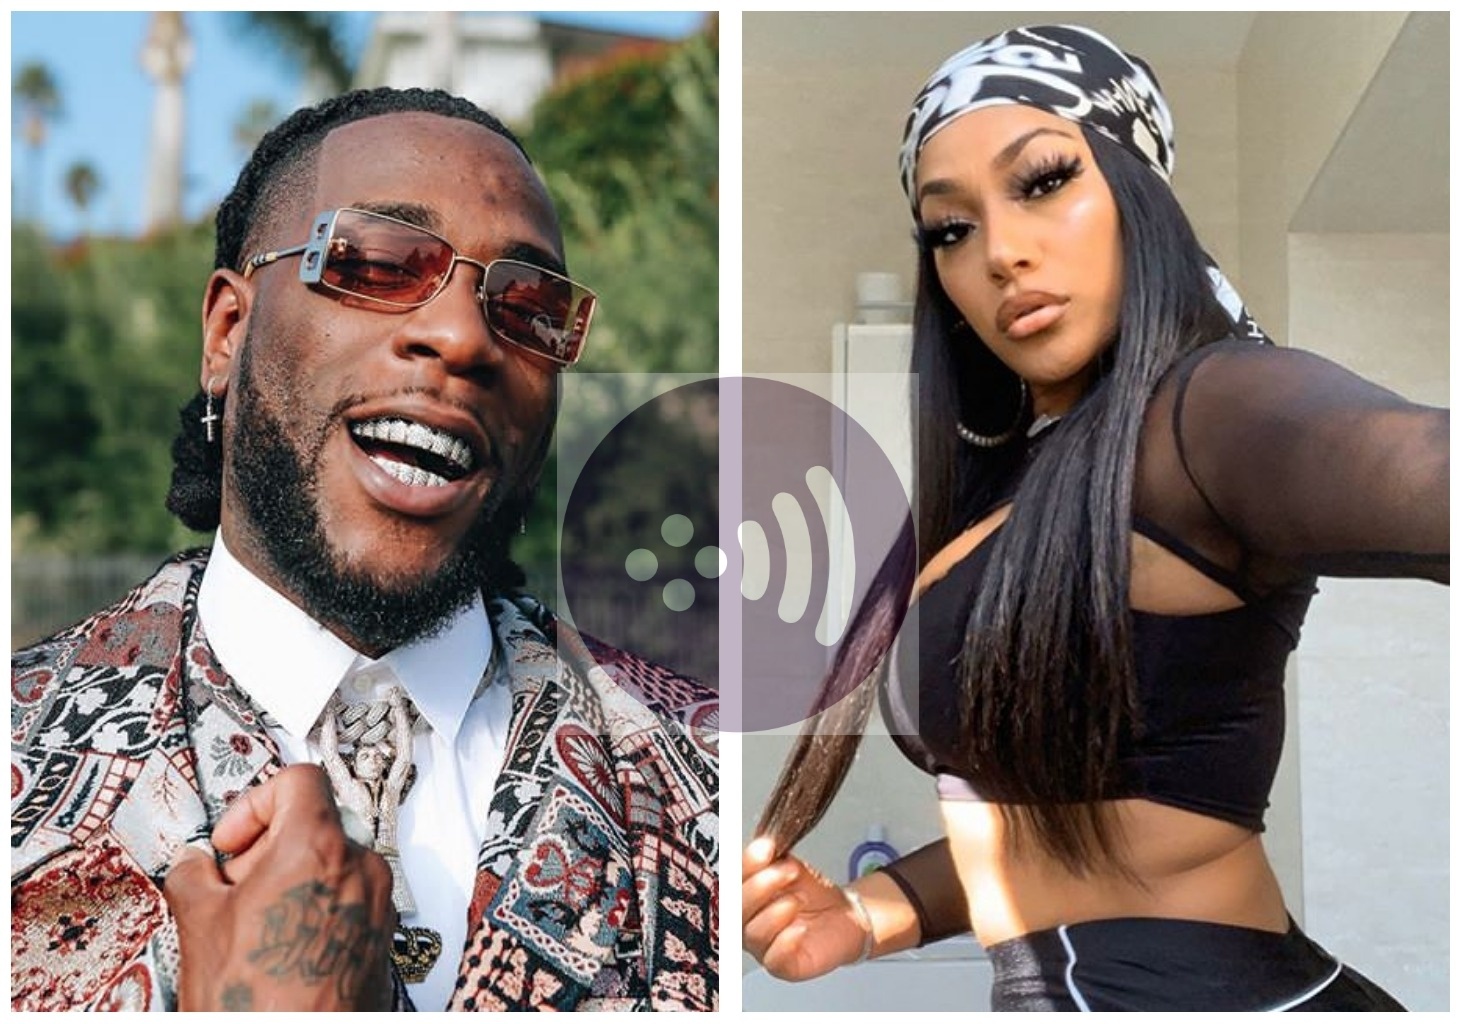 "I’ve lost weight during this Pandemic" – Burna Boy's girlfriend, Stefflon Don cries out (Video)